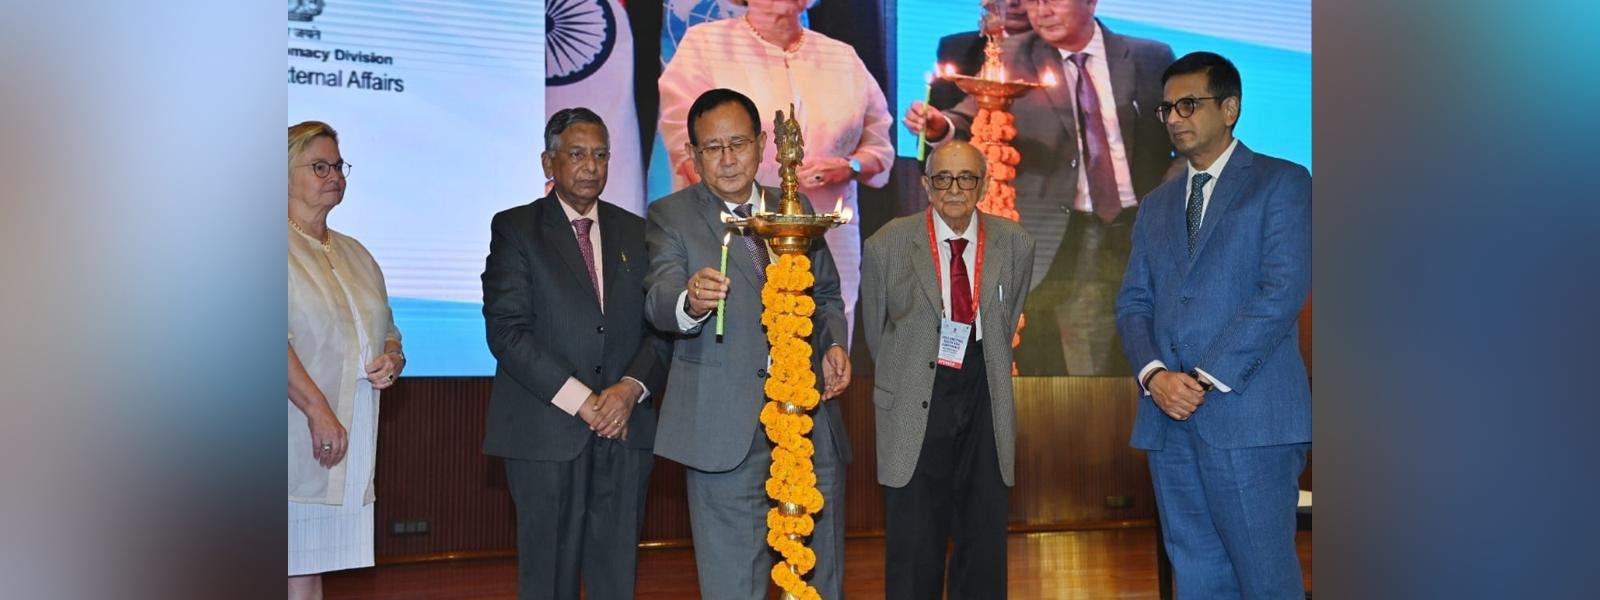 Minister of State for External Affairs Dr. Rajkumar Ranjan Singh addressed the inaugural session of 2023 UNCITRAL South Asia Conference in New Delhi